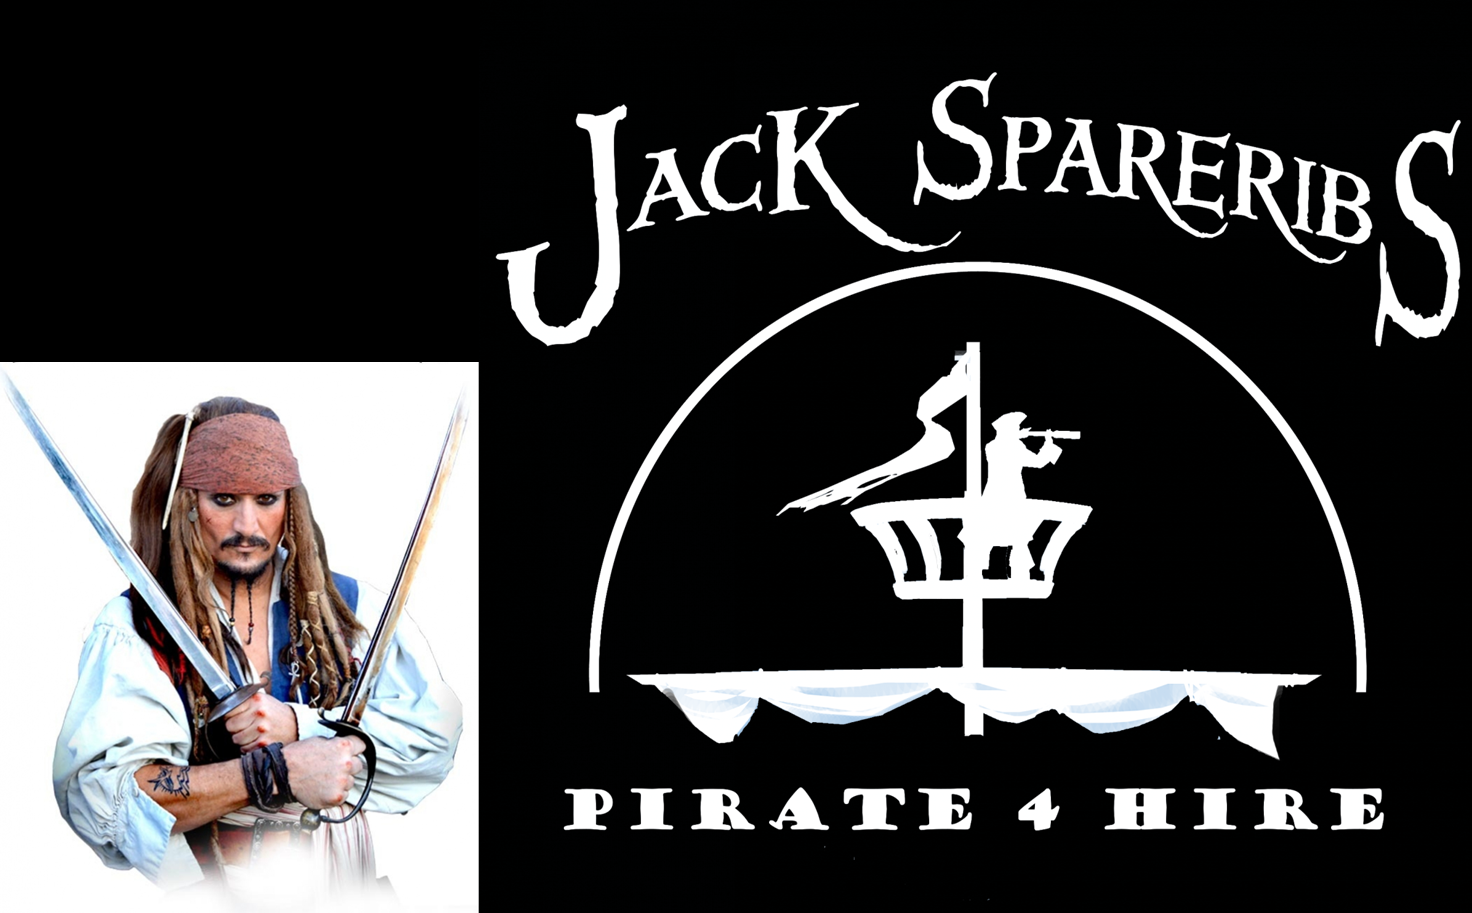 black background, white letters say jack spareribs pirate for hire. white pirate ship in between the words. picture of jack spareribs